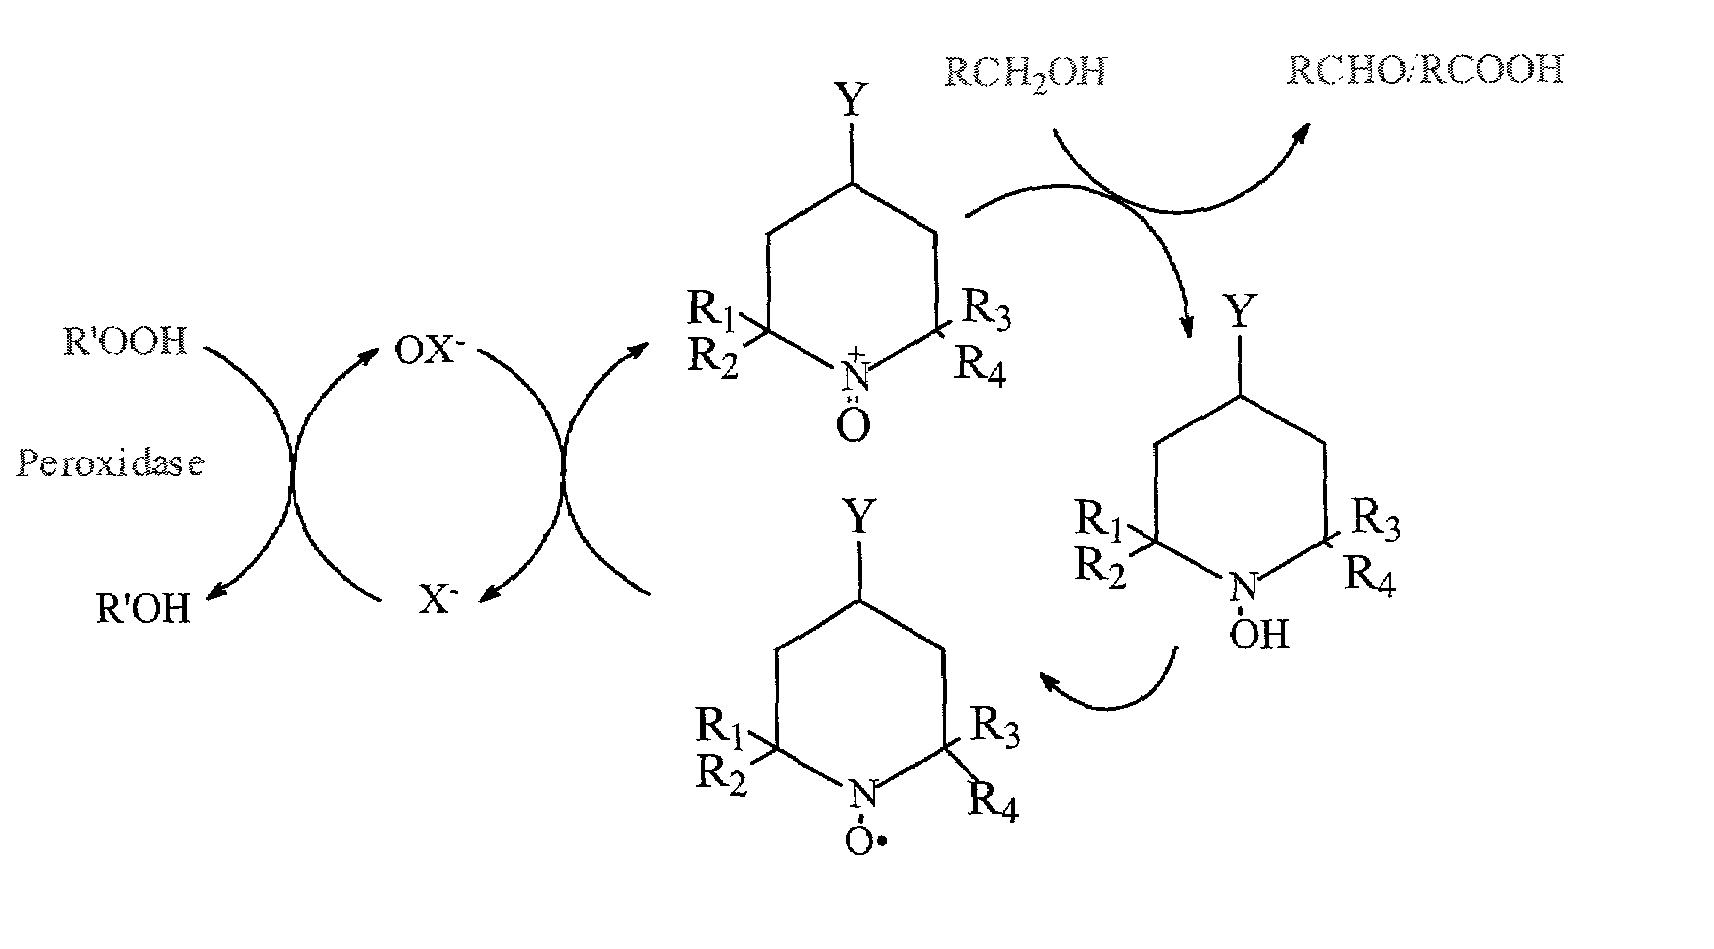 Process for the selective modification of carbohydrates by peroxidase catalyzed oxidation